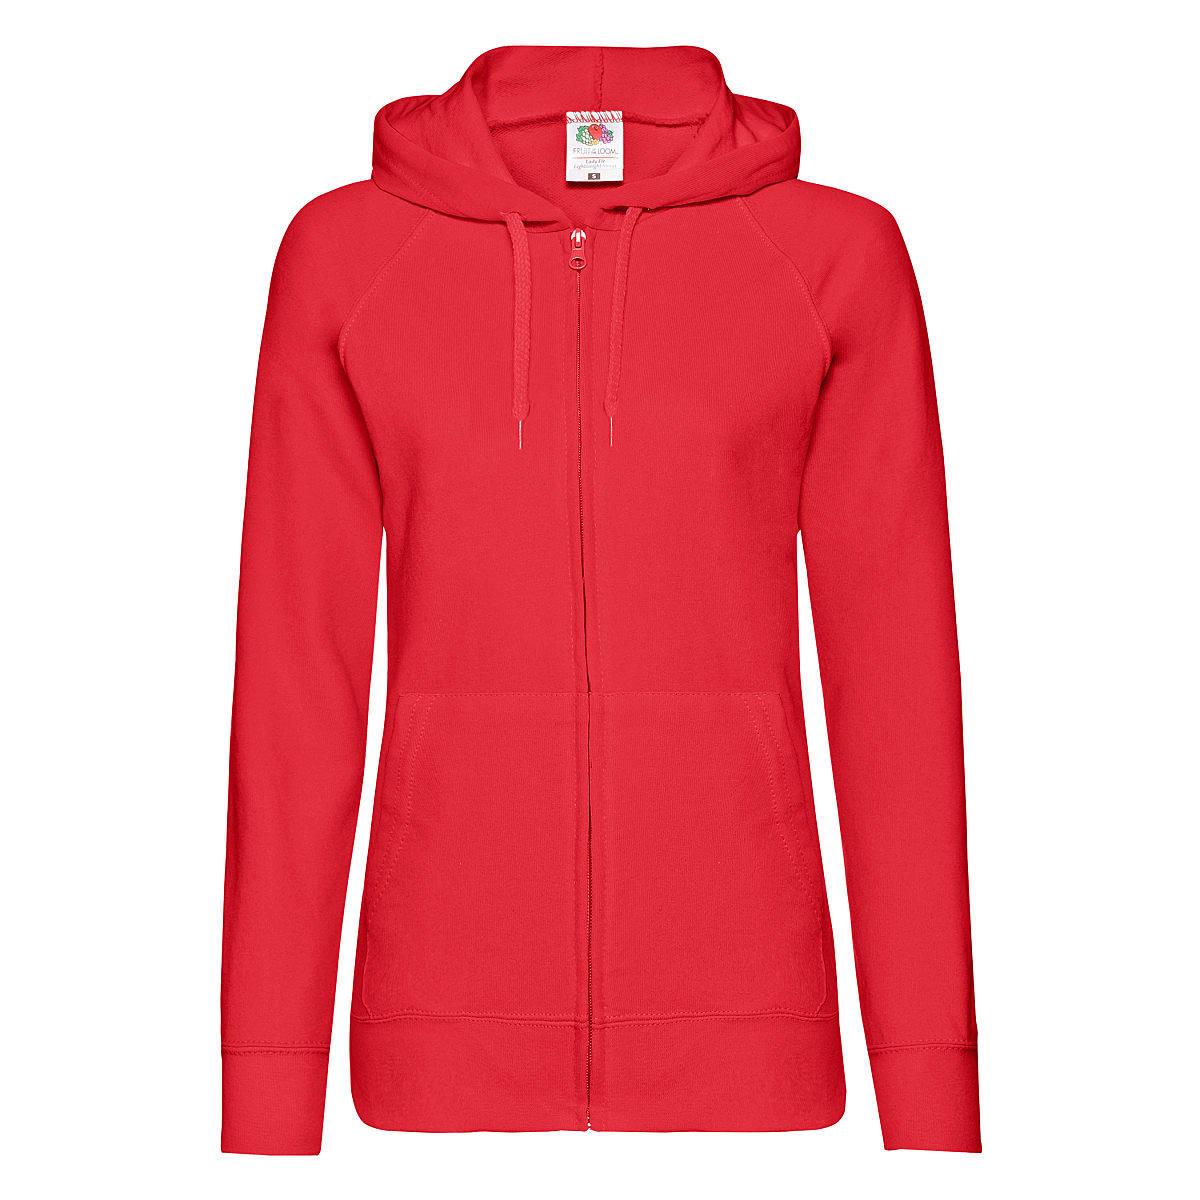 Fruit Of The Loom Lady-Fit Lightweight Full-Zip Hoodie in Red (Product Code: 62150)